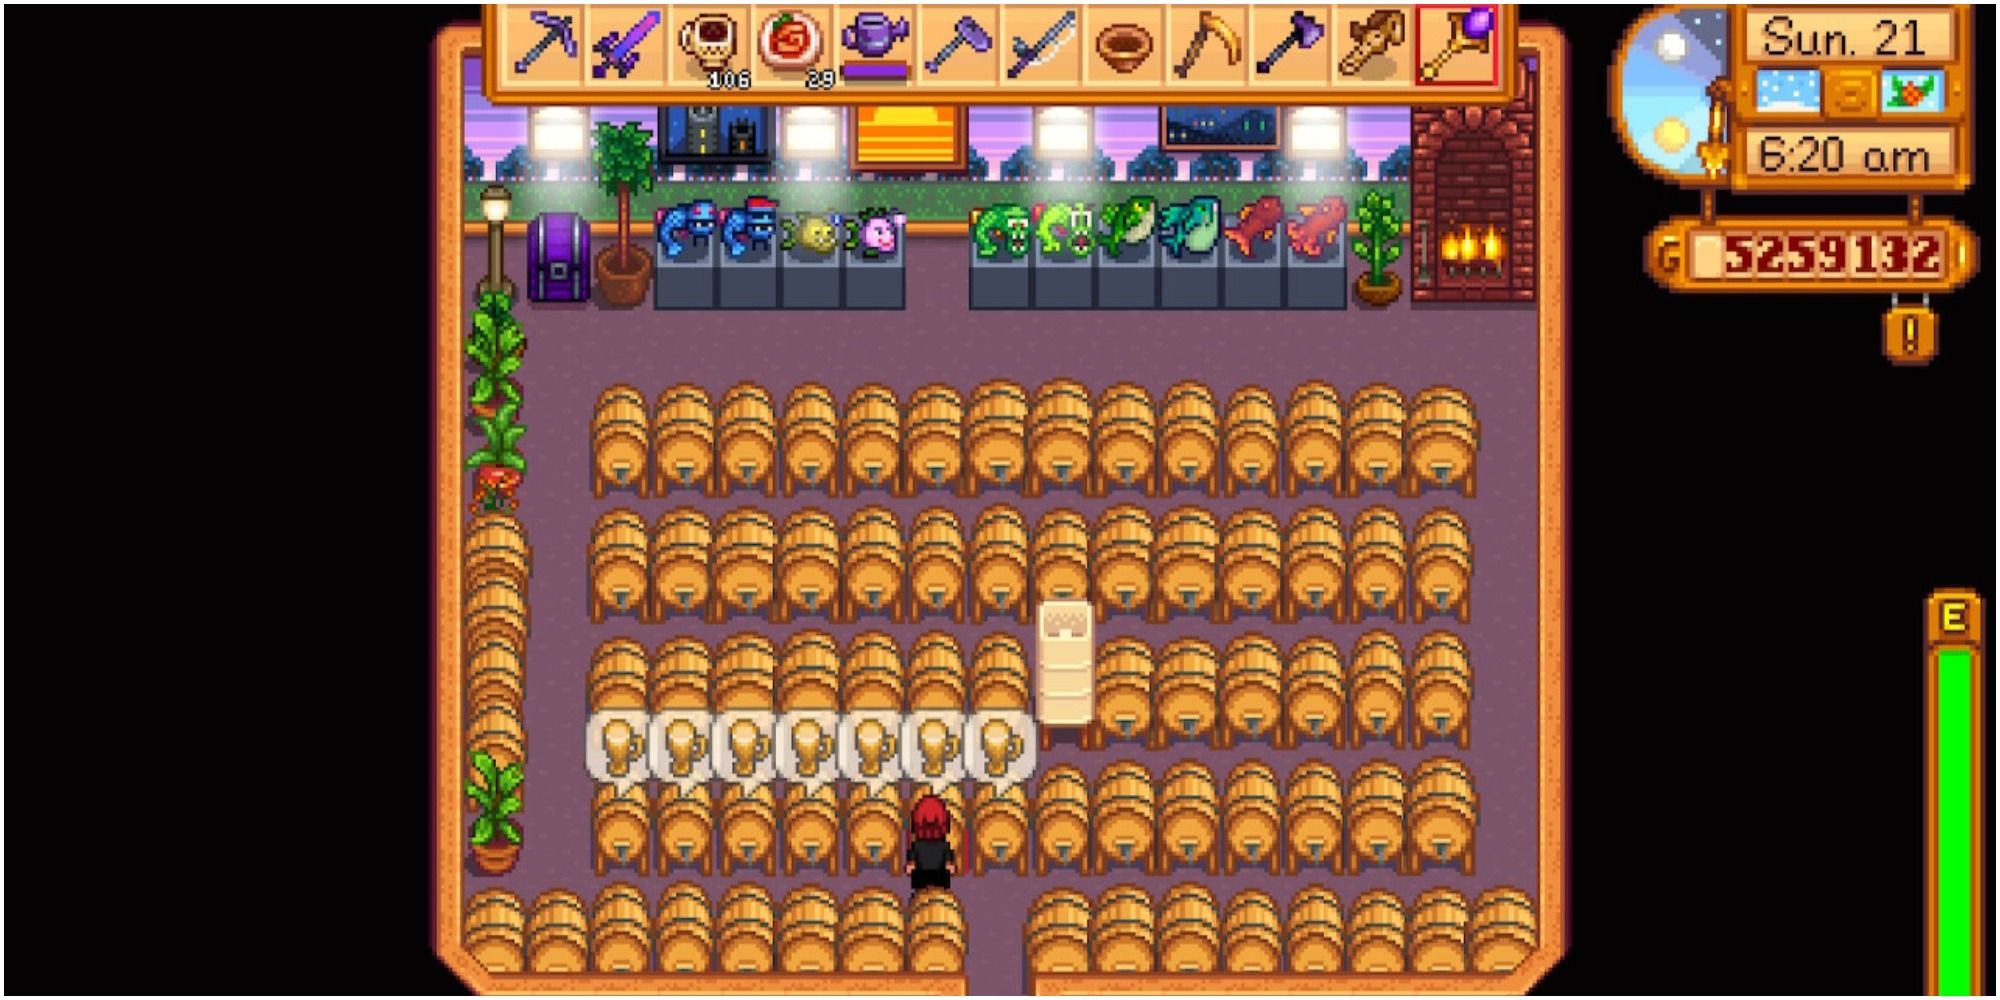 Stardew Valley: An image of a shed full of Kegs producing Pale Ale.